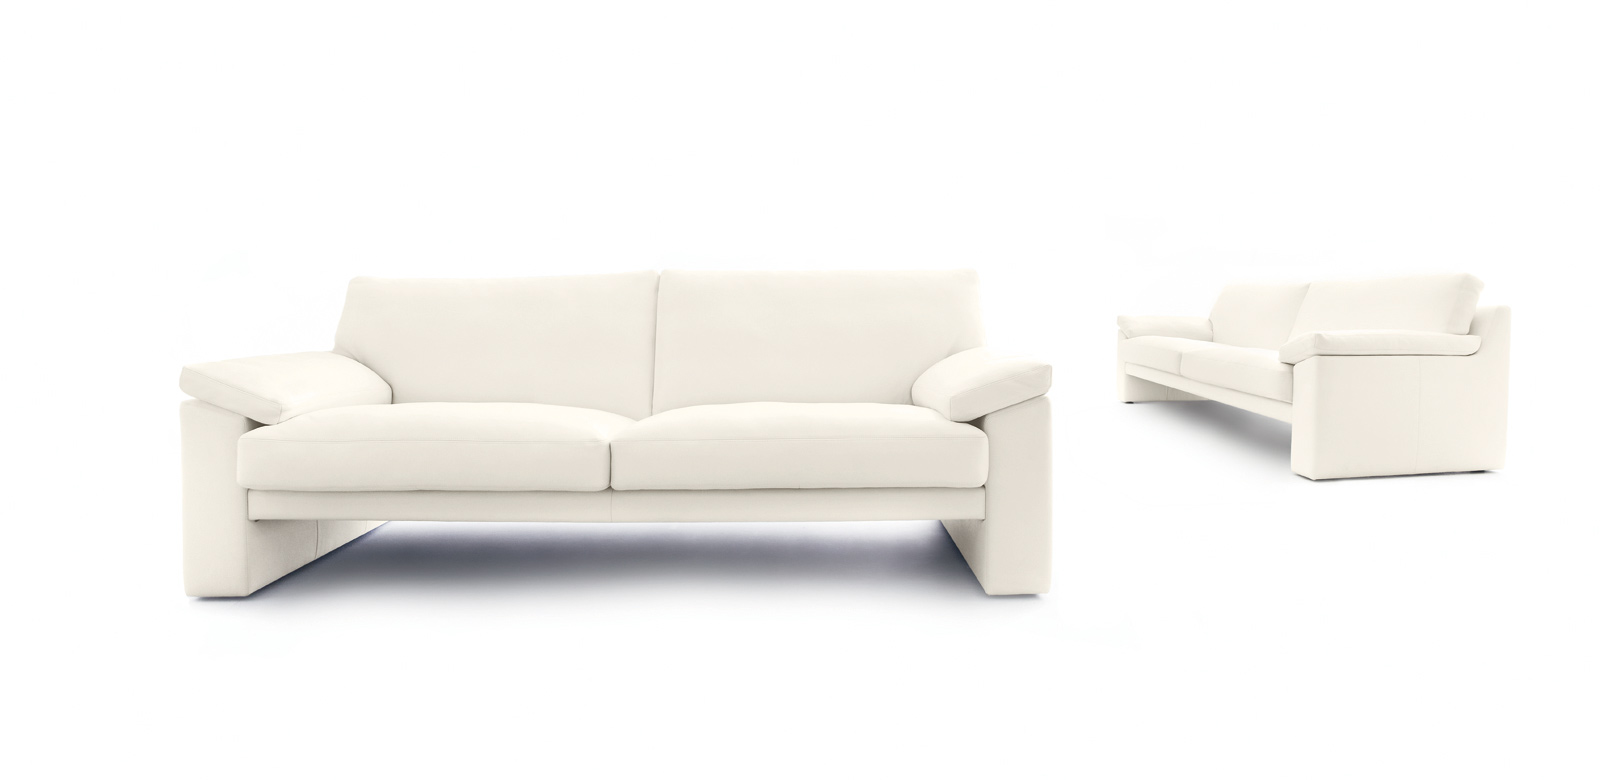 CL600 with white leather and armrest cushion